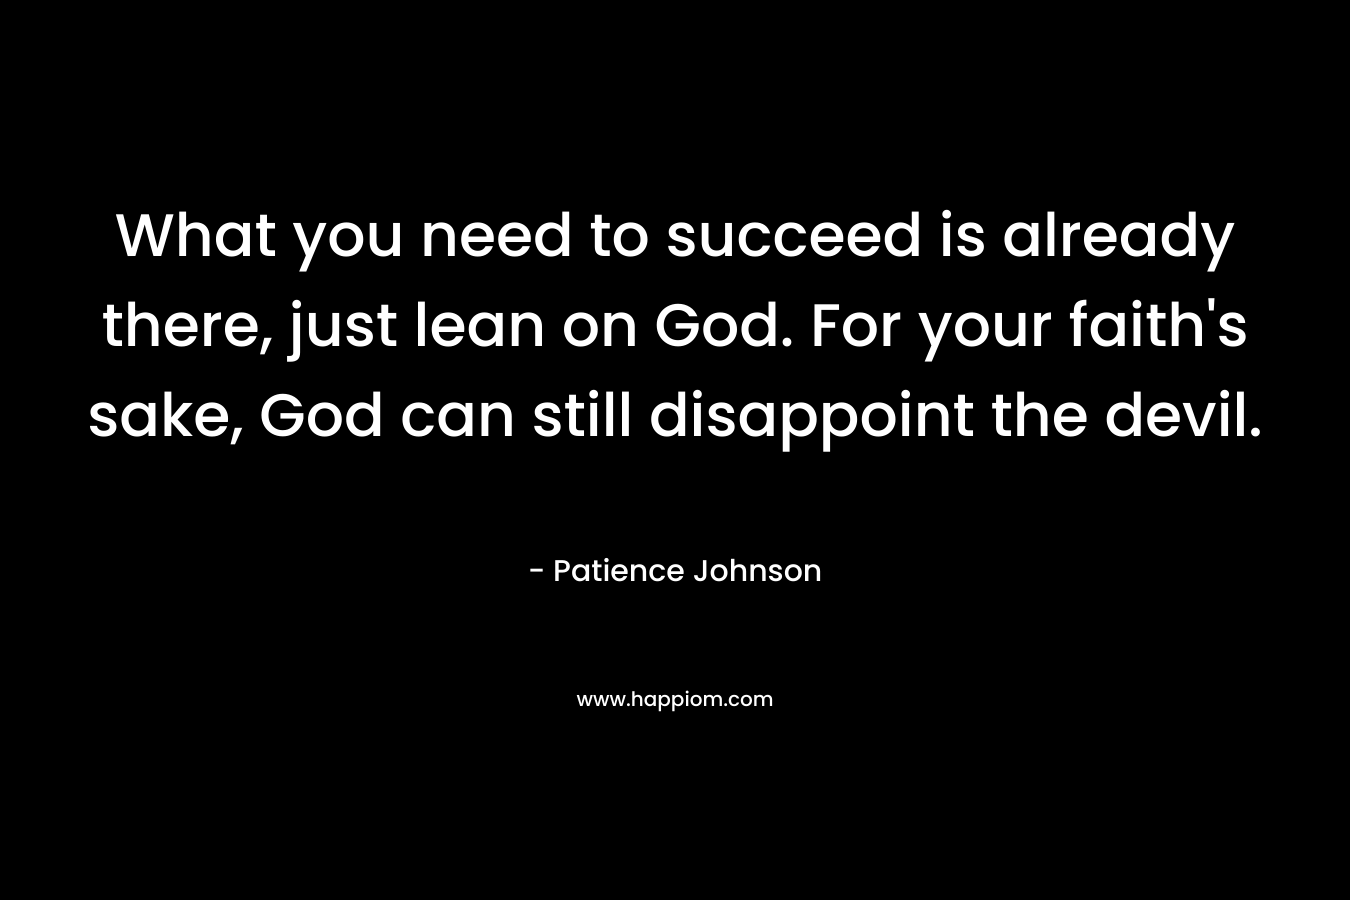 What you need to succeed is already there, just lean on God. For your faith’s sake, God can still disappoint the devil. – Patience Johnson